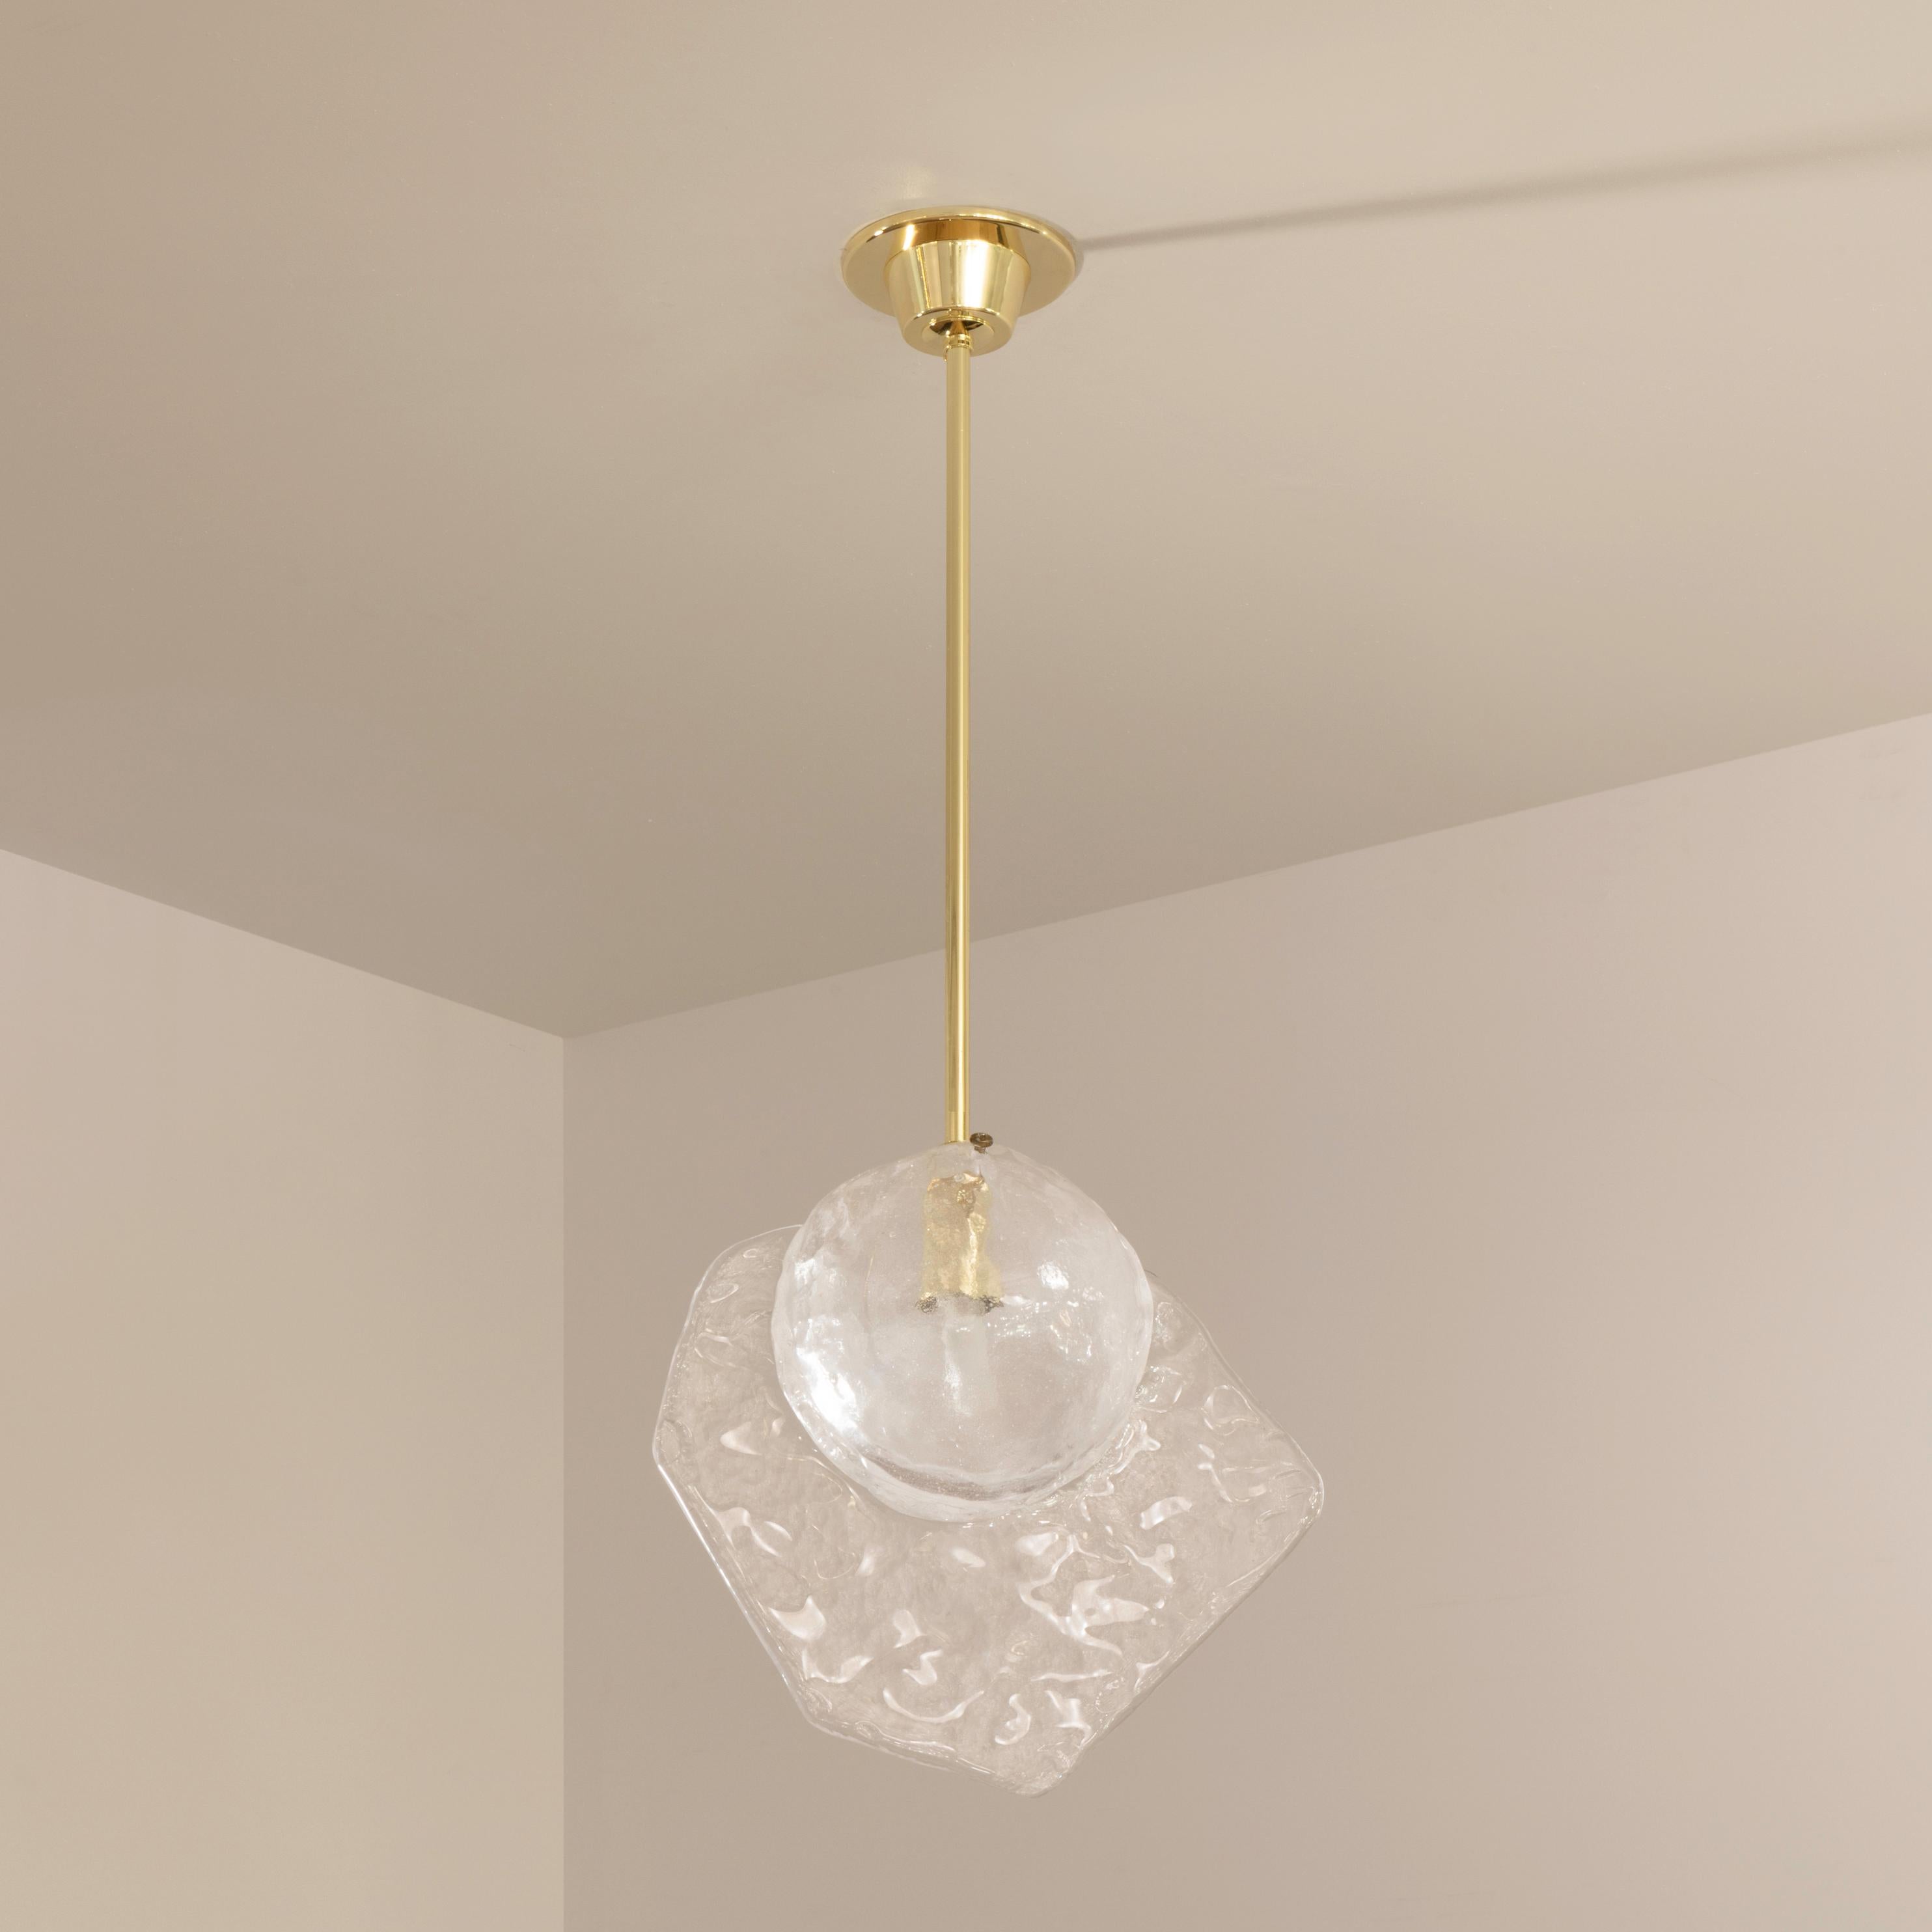 Inspired by the breeze of the venetian lagoon, the Brezza pendant, is constructed from hand blown Murano glass with a bubble infused core and a textured fin. Shown on a polished brass stem.

Customization Options:
Each fixture is hand crafted in